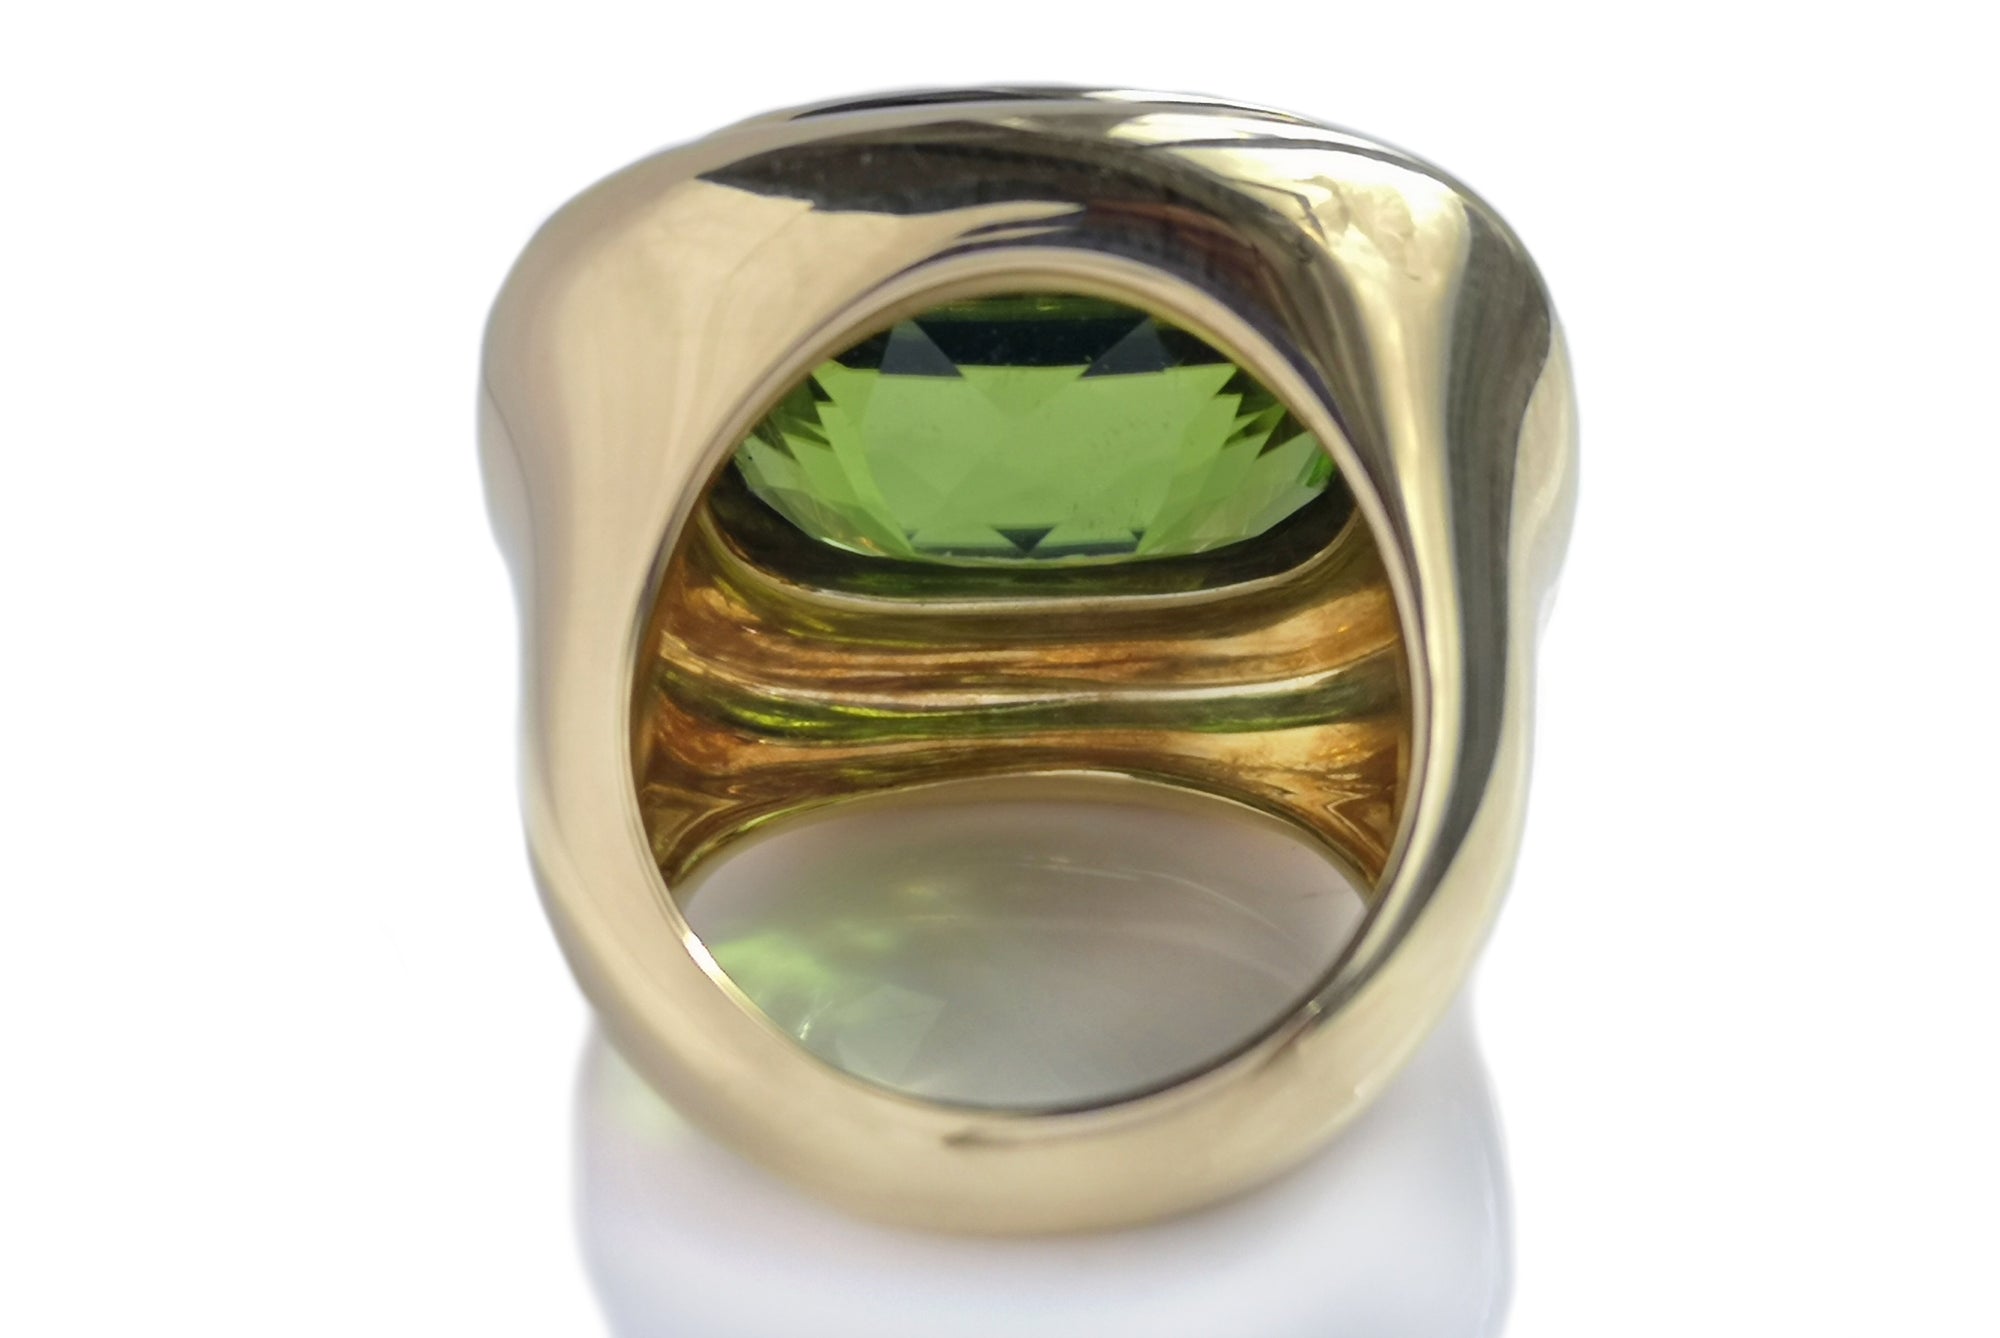 Tiffany & Co. 1980s Vintage 20 Carat Peridot Ring by Paloma Picasso